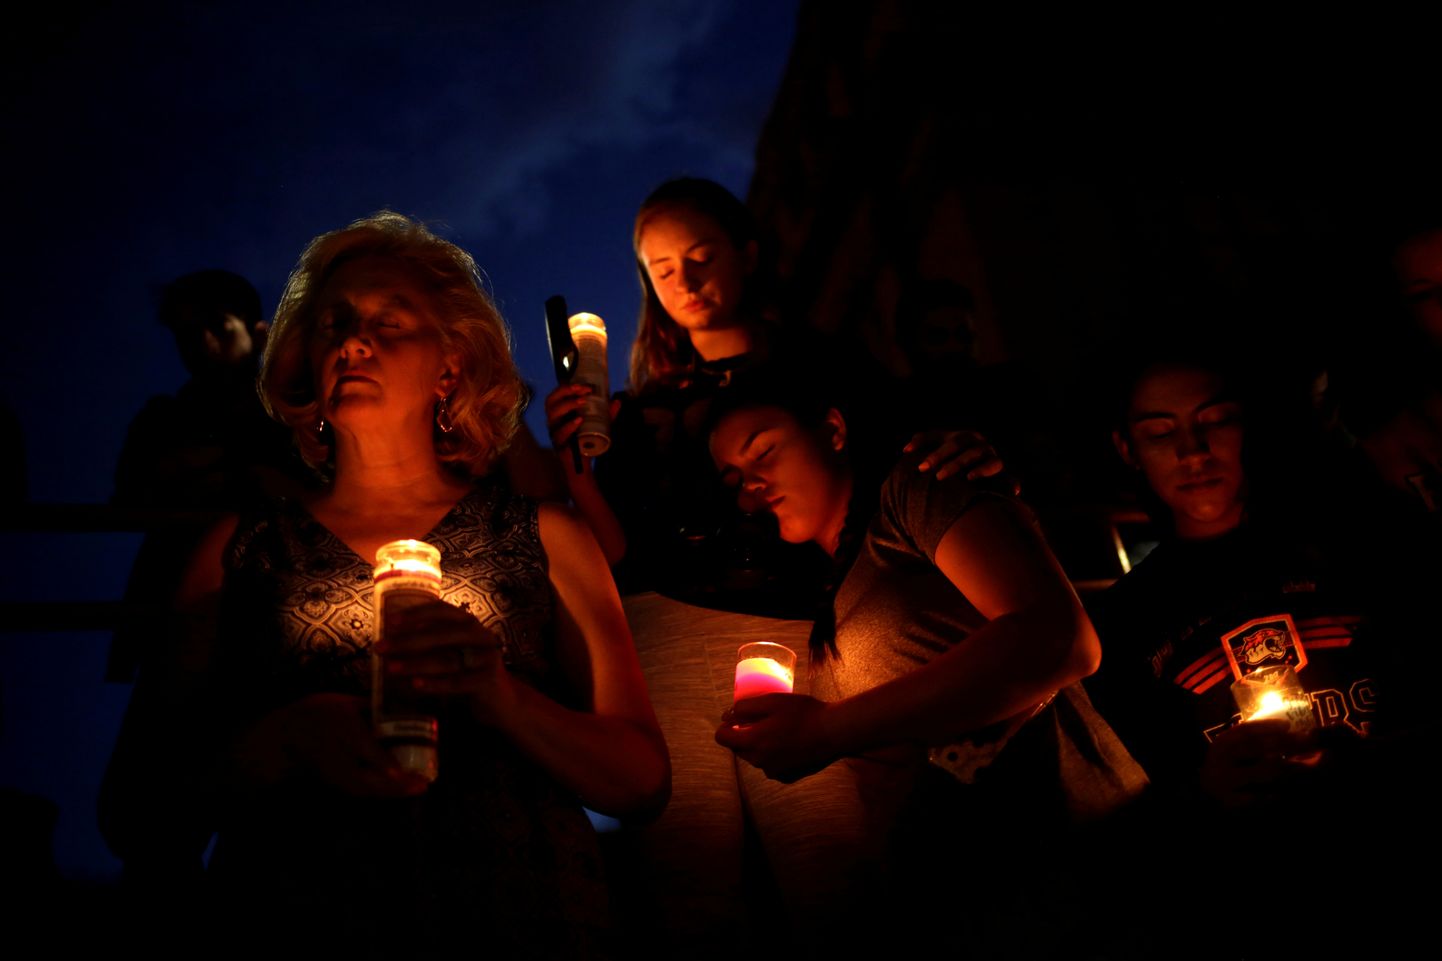 Mourners taking part in a vigil at El Paso High School after a mass shooting at a Walmart store in El Paso, Texas, U.S. August 3, 2019. REUTERS/Jose Luis Gonzalez     TPX IMAGES OF THE DAY